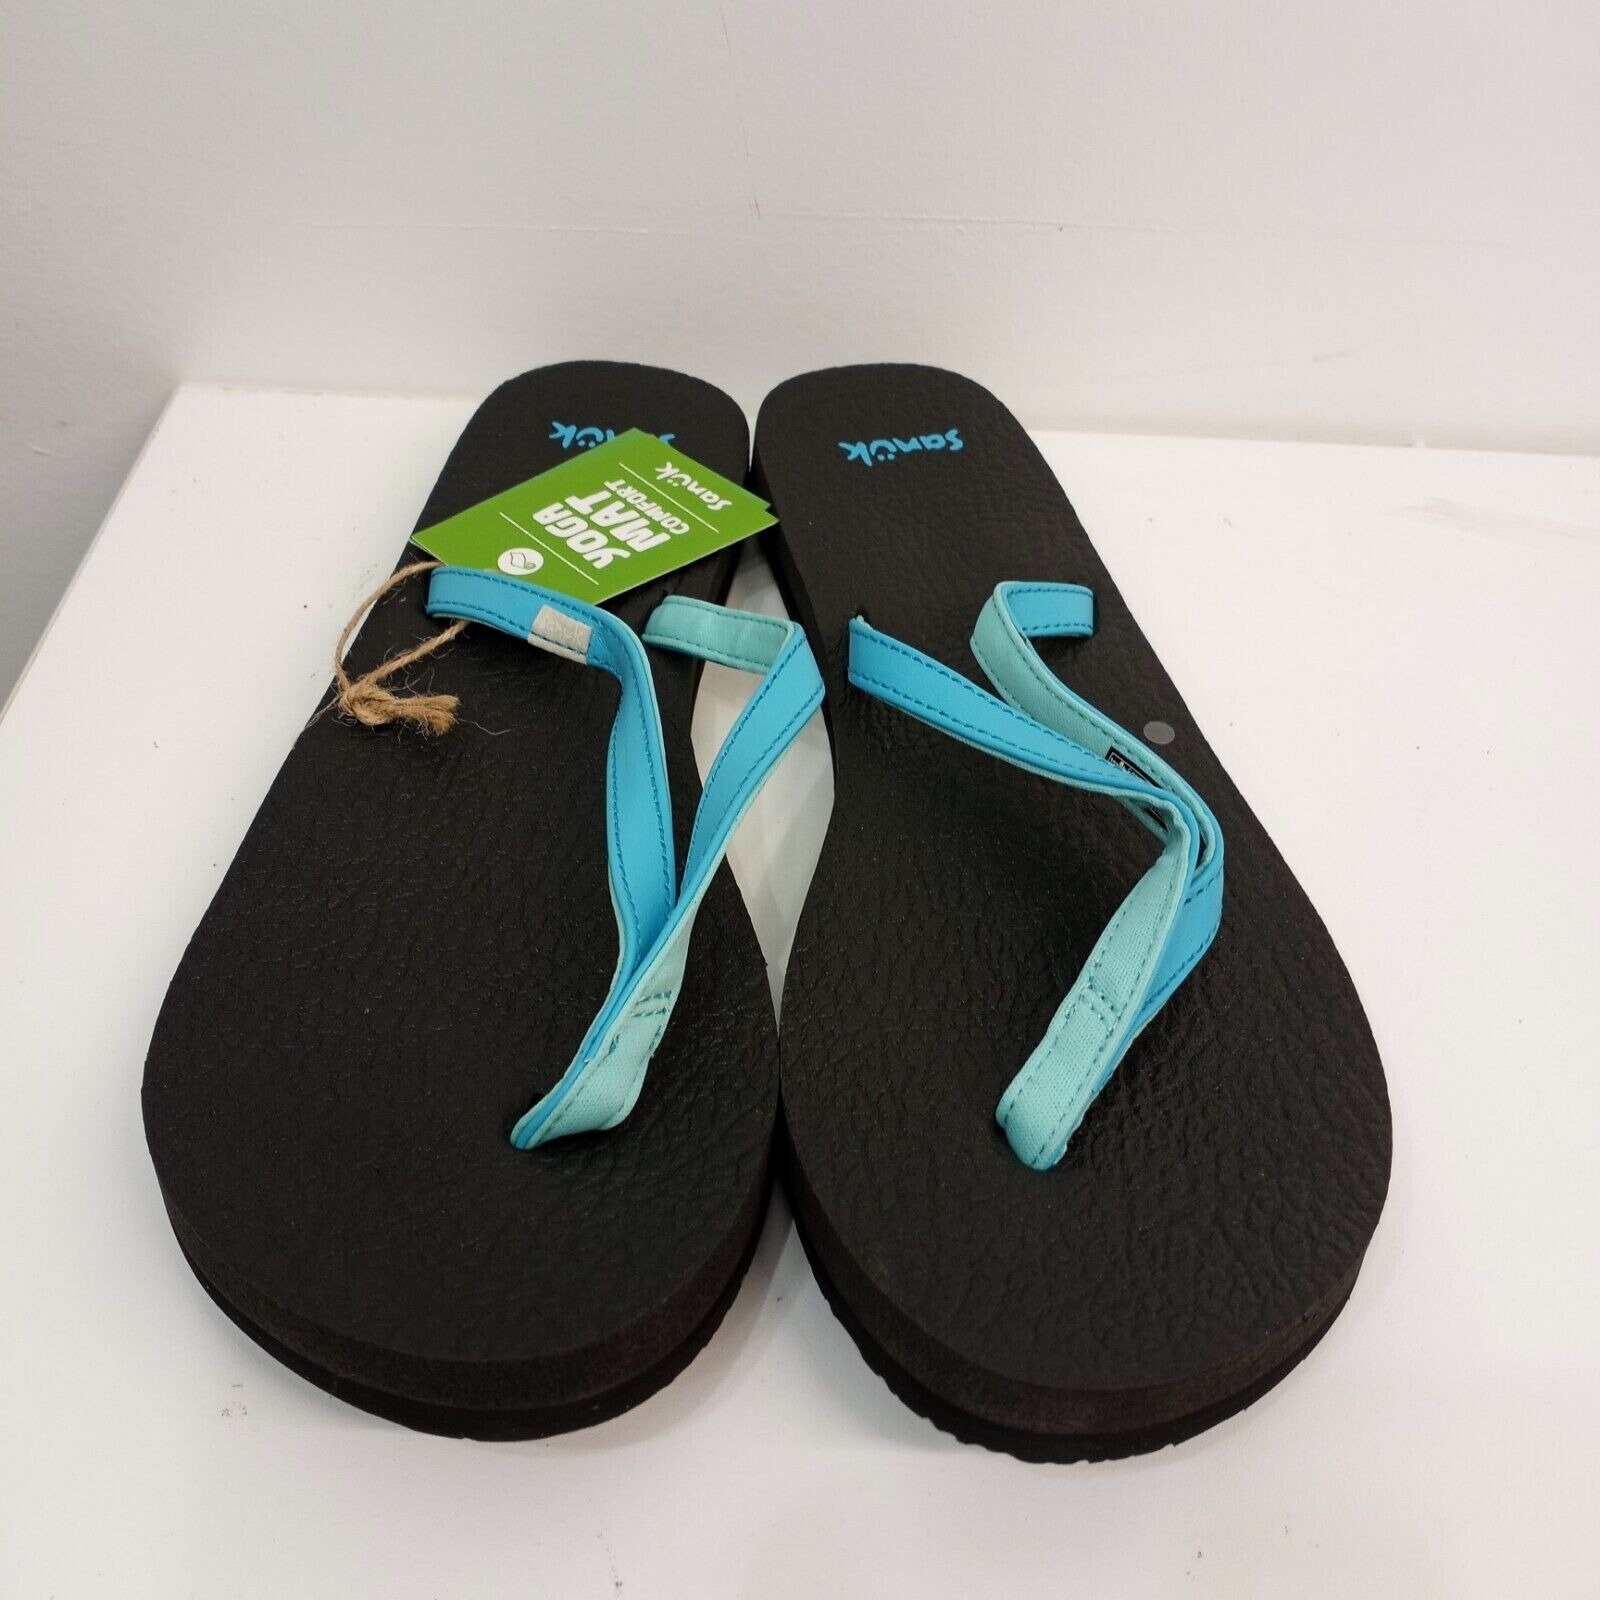 New Sanuk Yoga Mat Flip Flops Thong Sandals Size 9 Turquoise Mother's Day  Gift Idea 